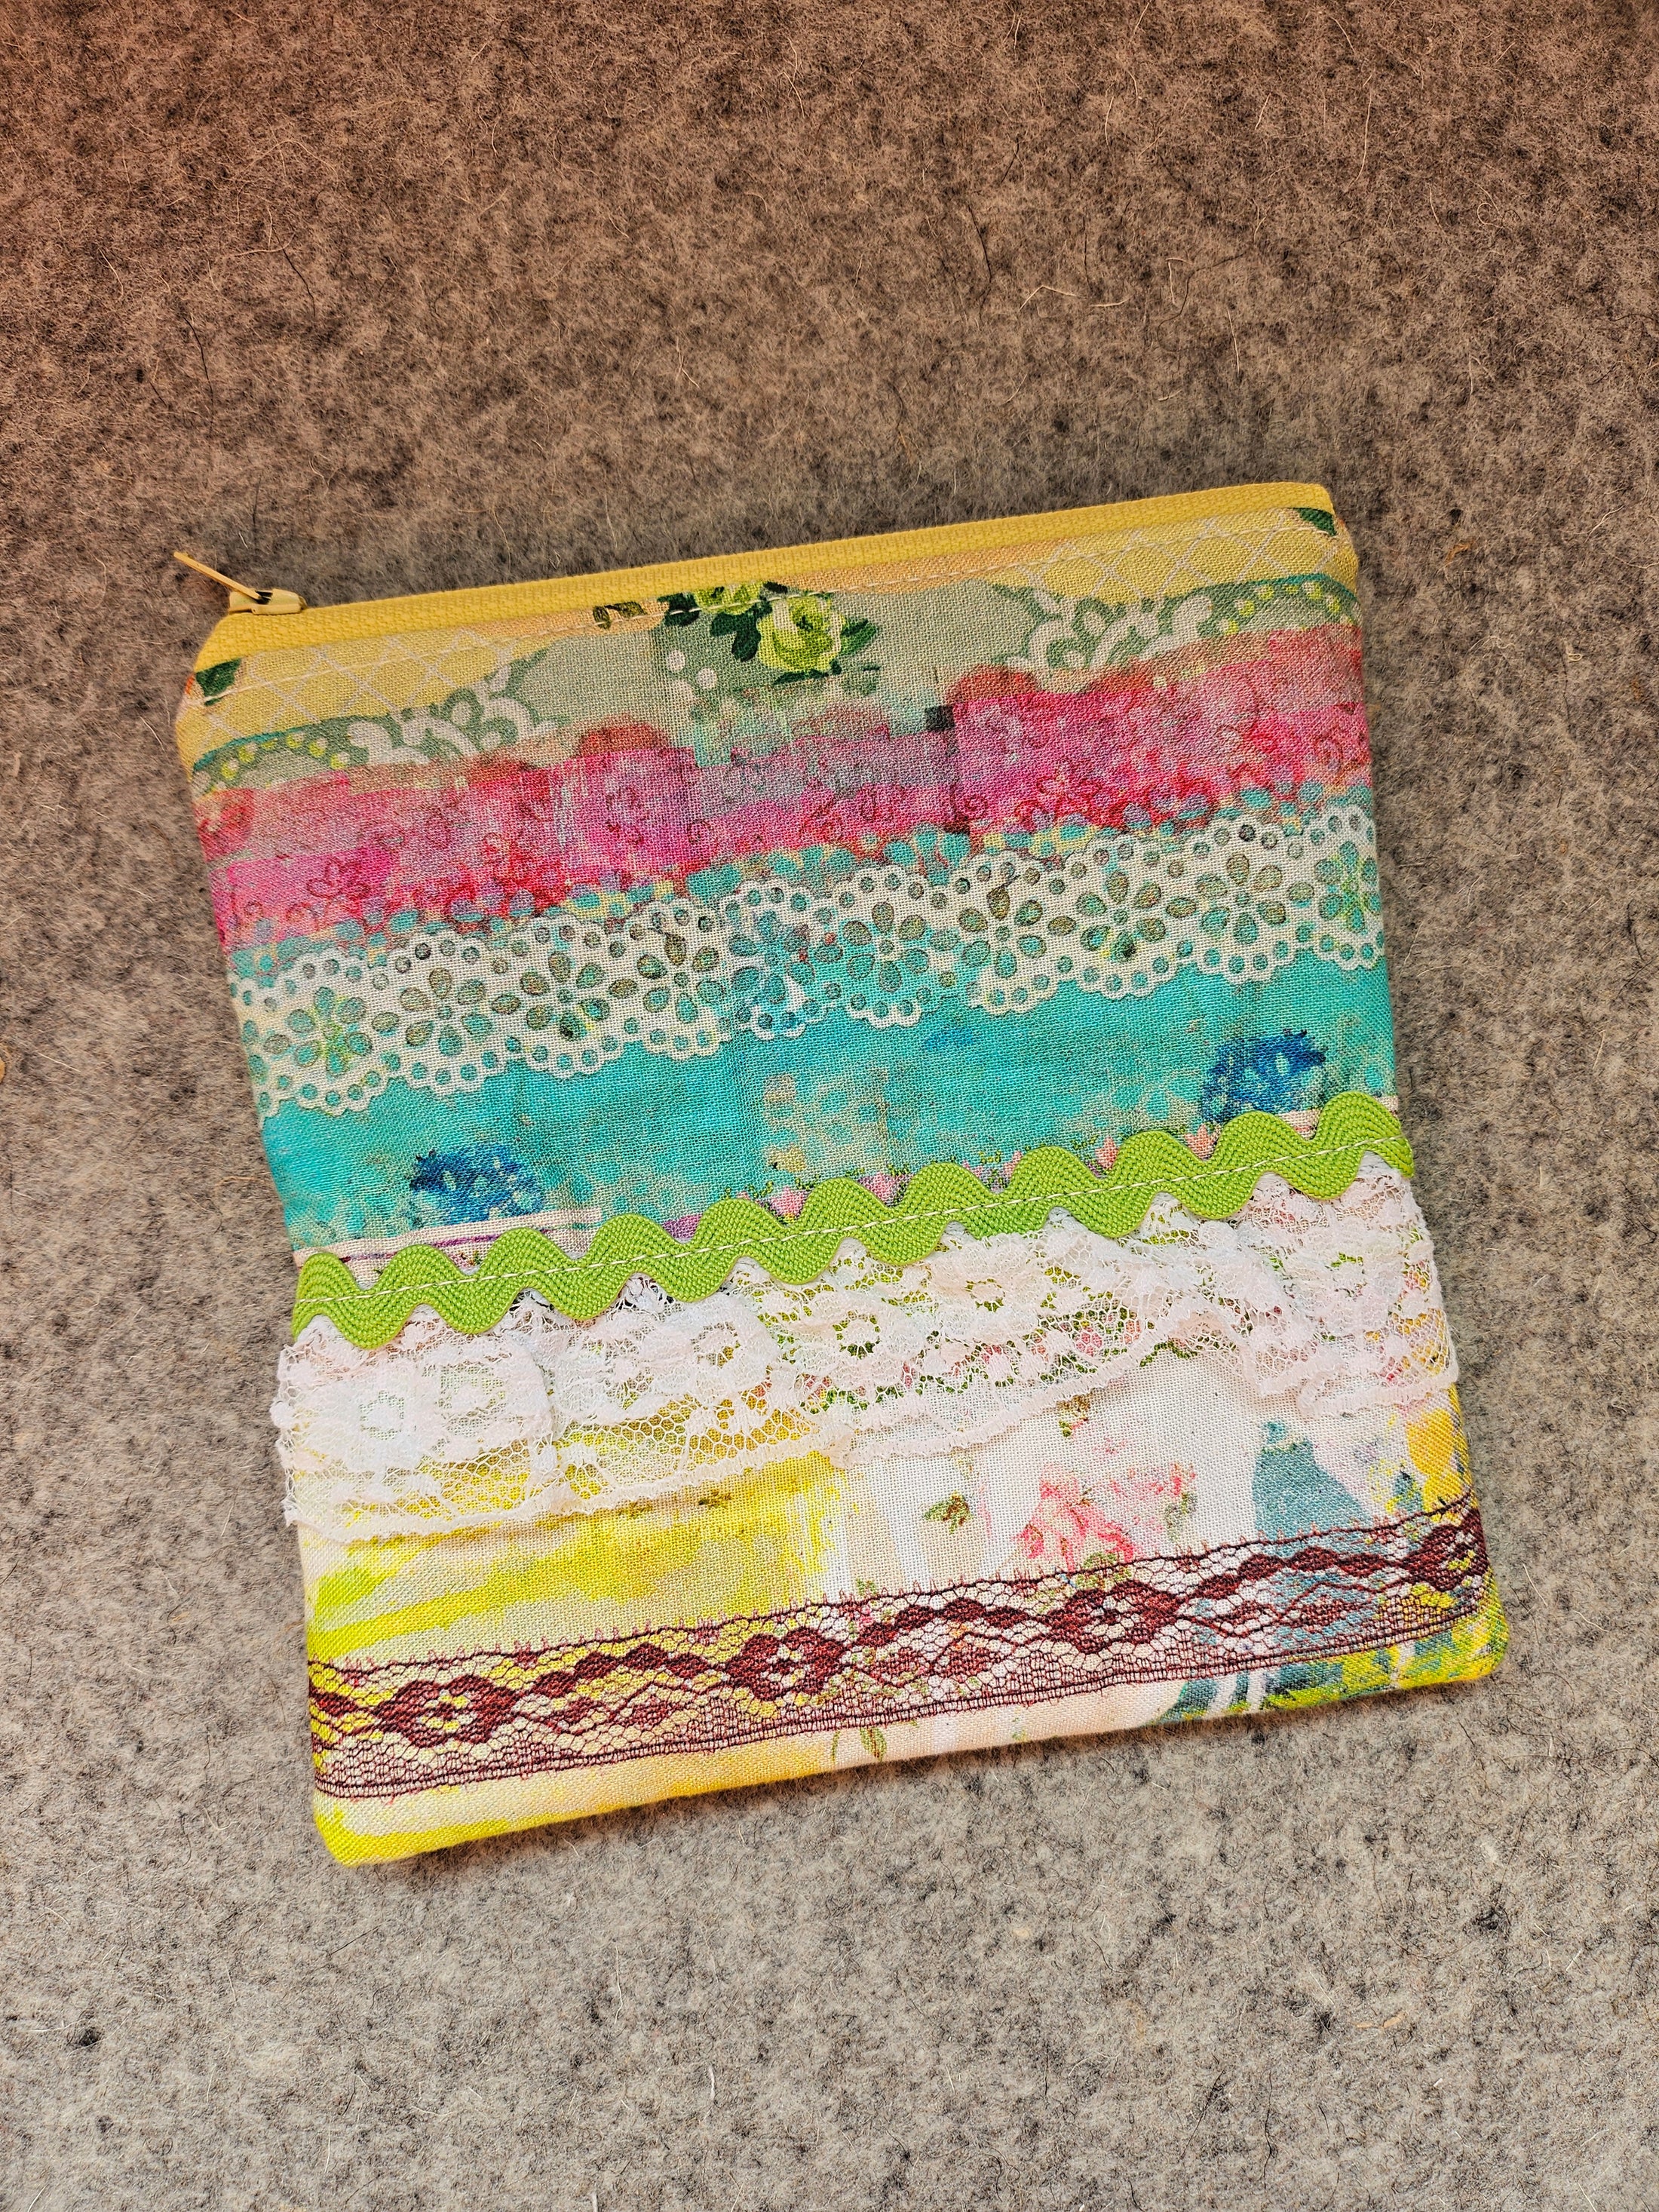 Watercolor lace zipper pouch embellished with lace and rick rack. 